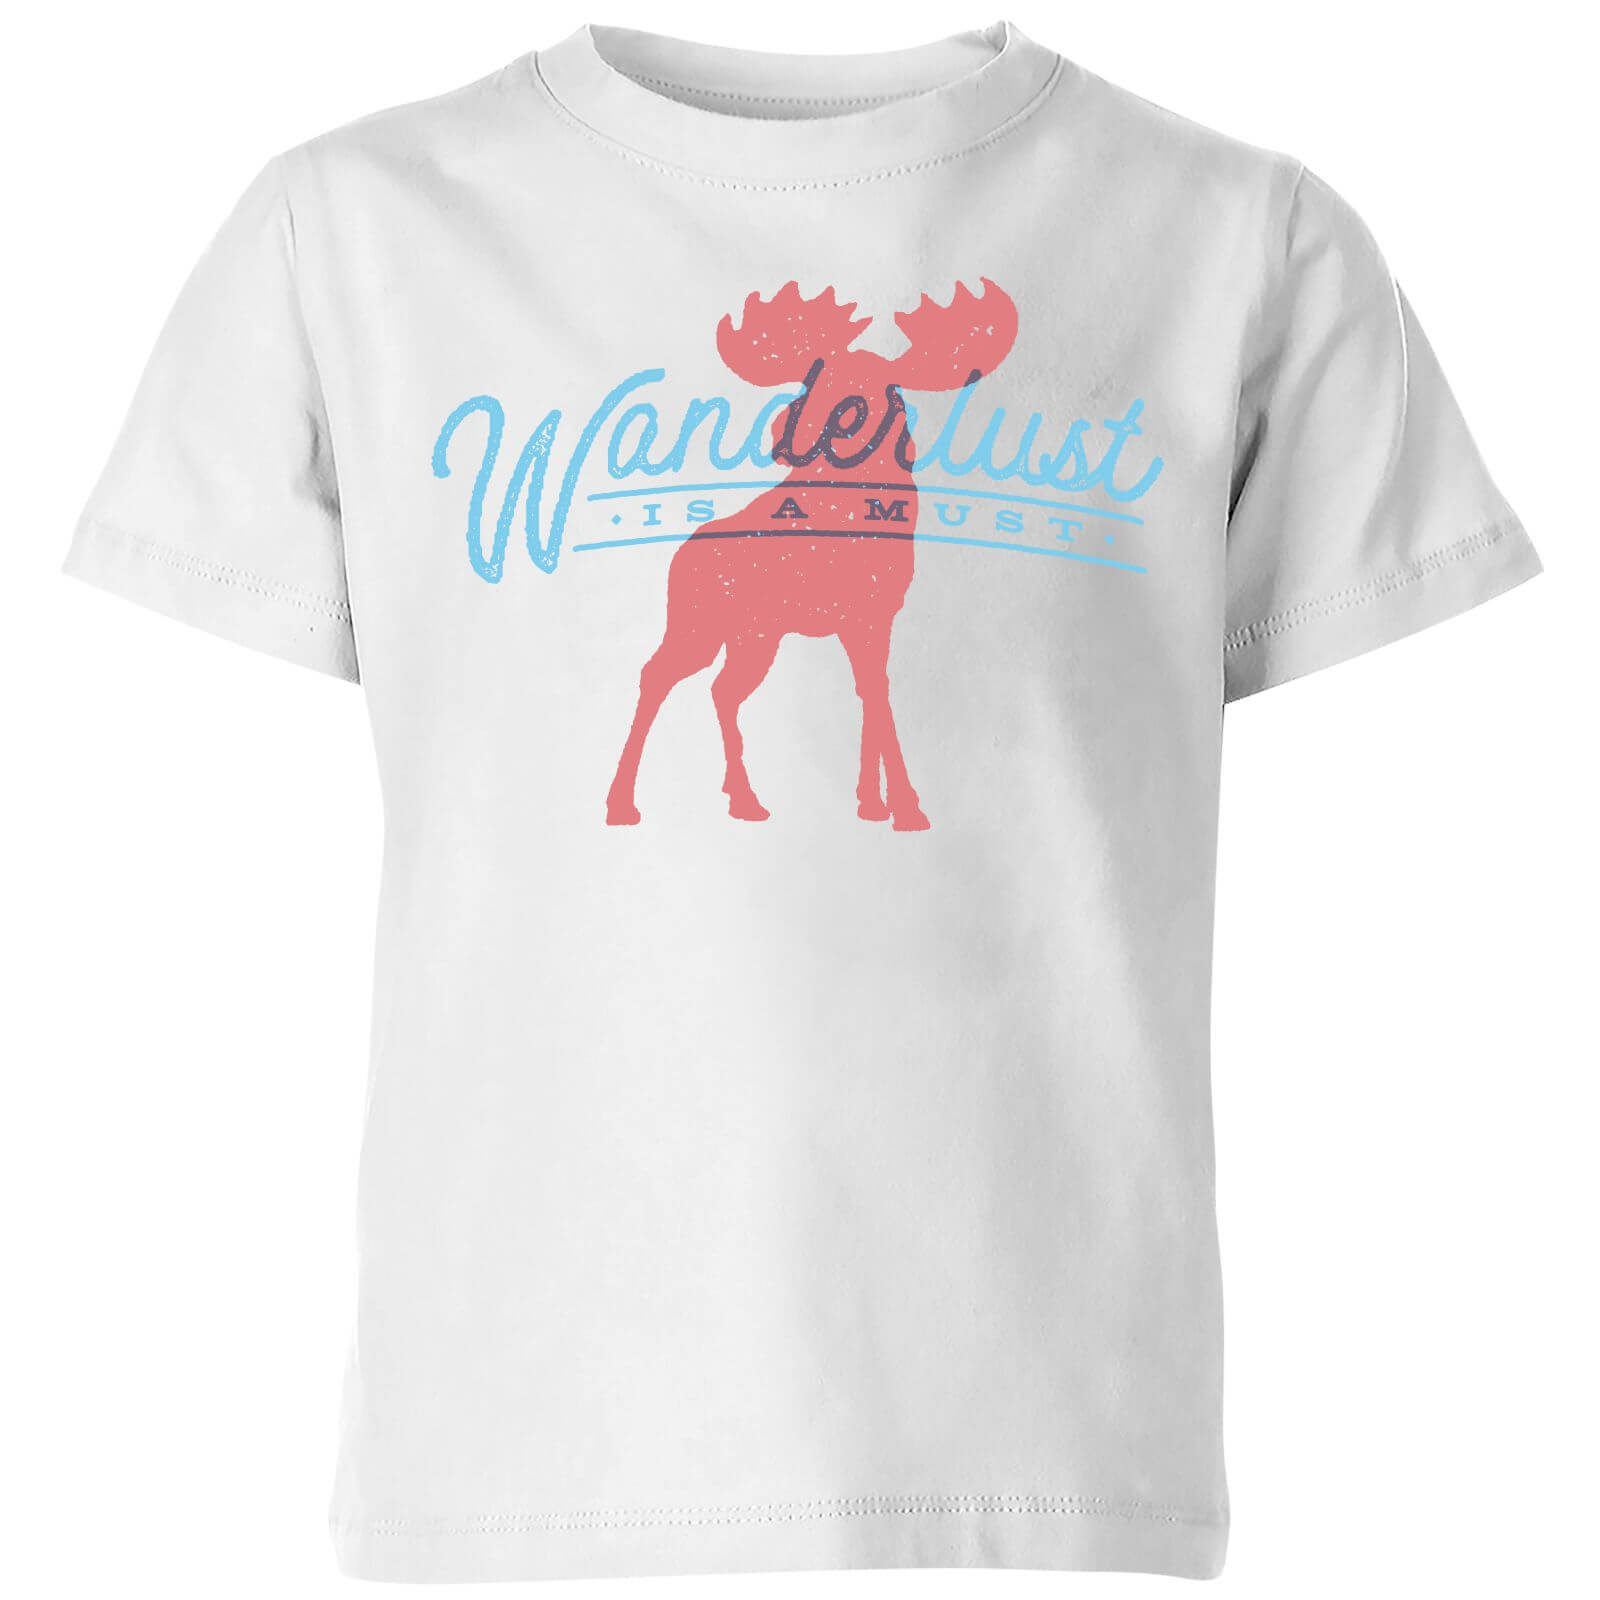 Wanderlust Is A Must Kids' T-Shirt - White - 3-4 Years - White